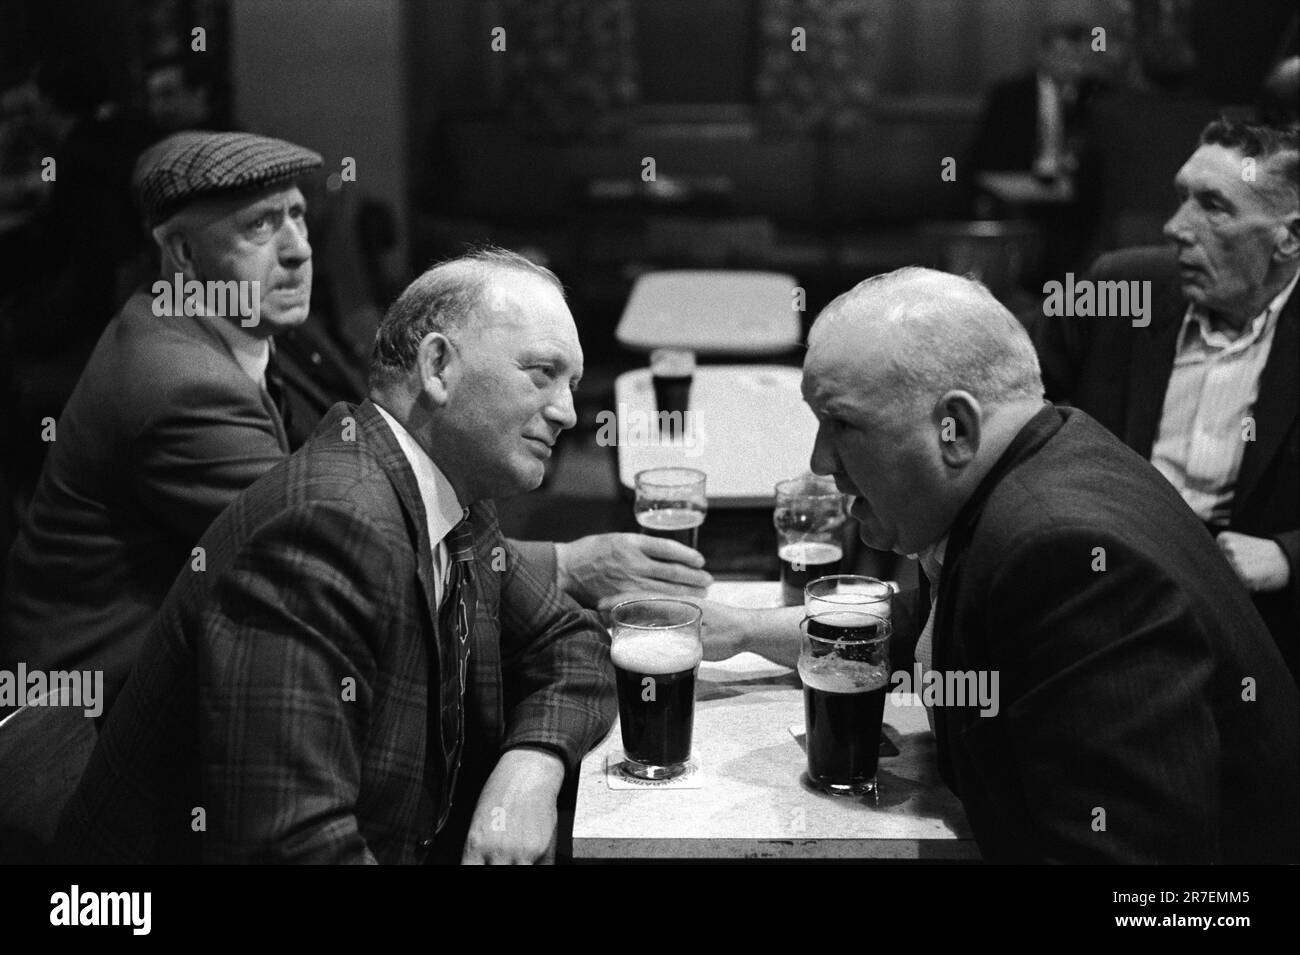 Pintes de bière. Samedi soir au Byker and St Peters Working Men's Club, Newcastle upon Tyne, Tyne and Wear, nord de l'Angleterre vers 1973. 1970S UK HOMER SYKES Banque D'Images